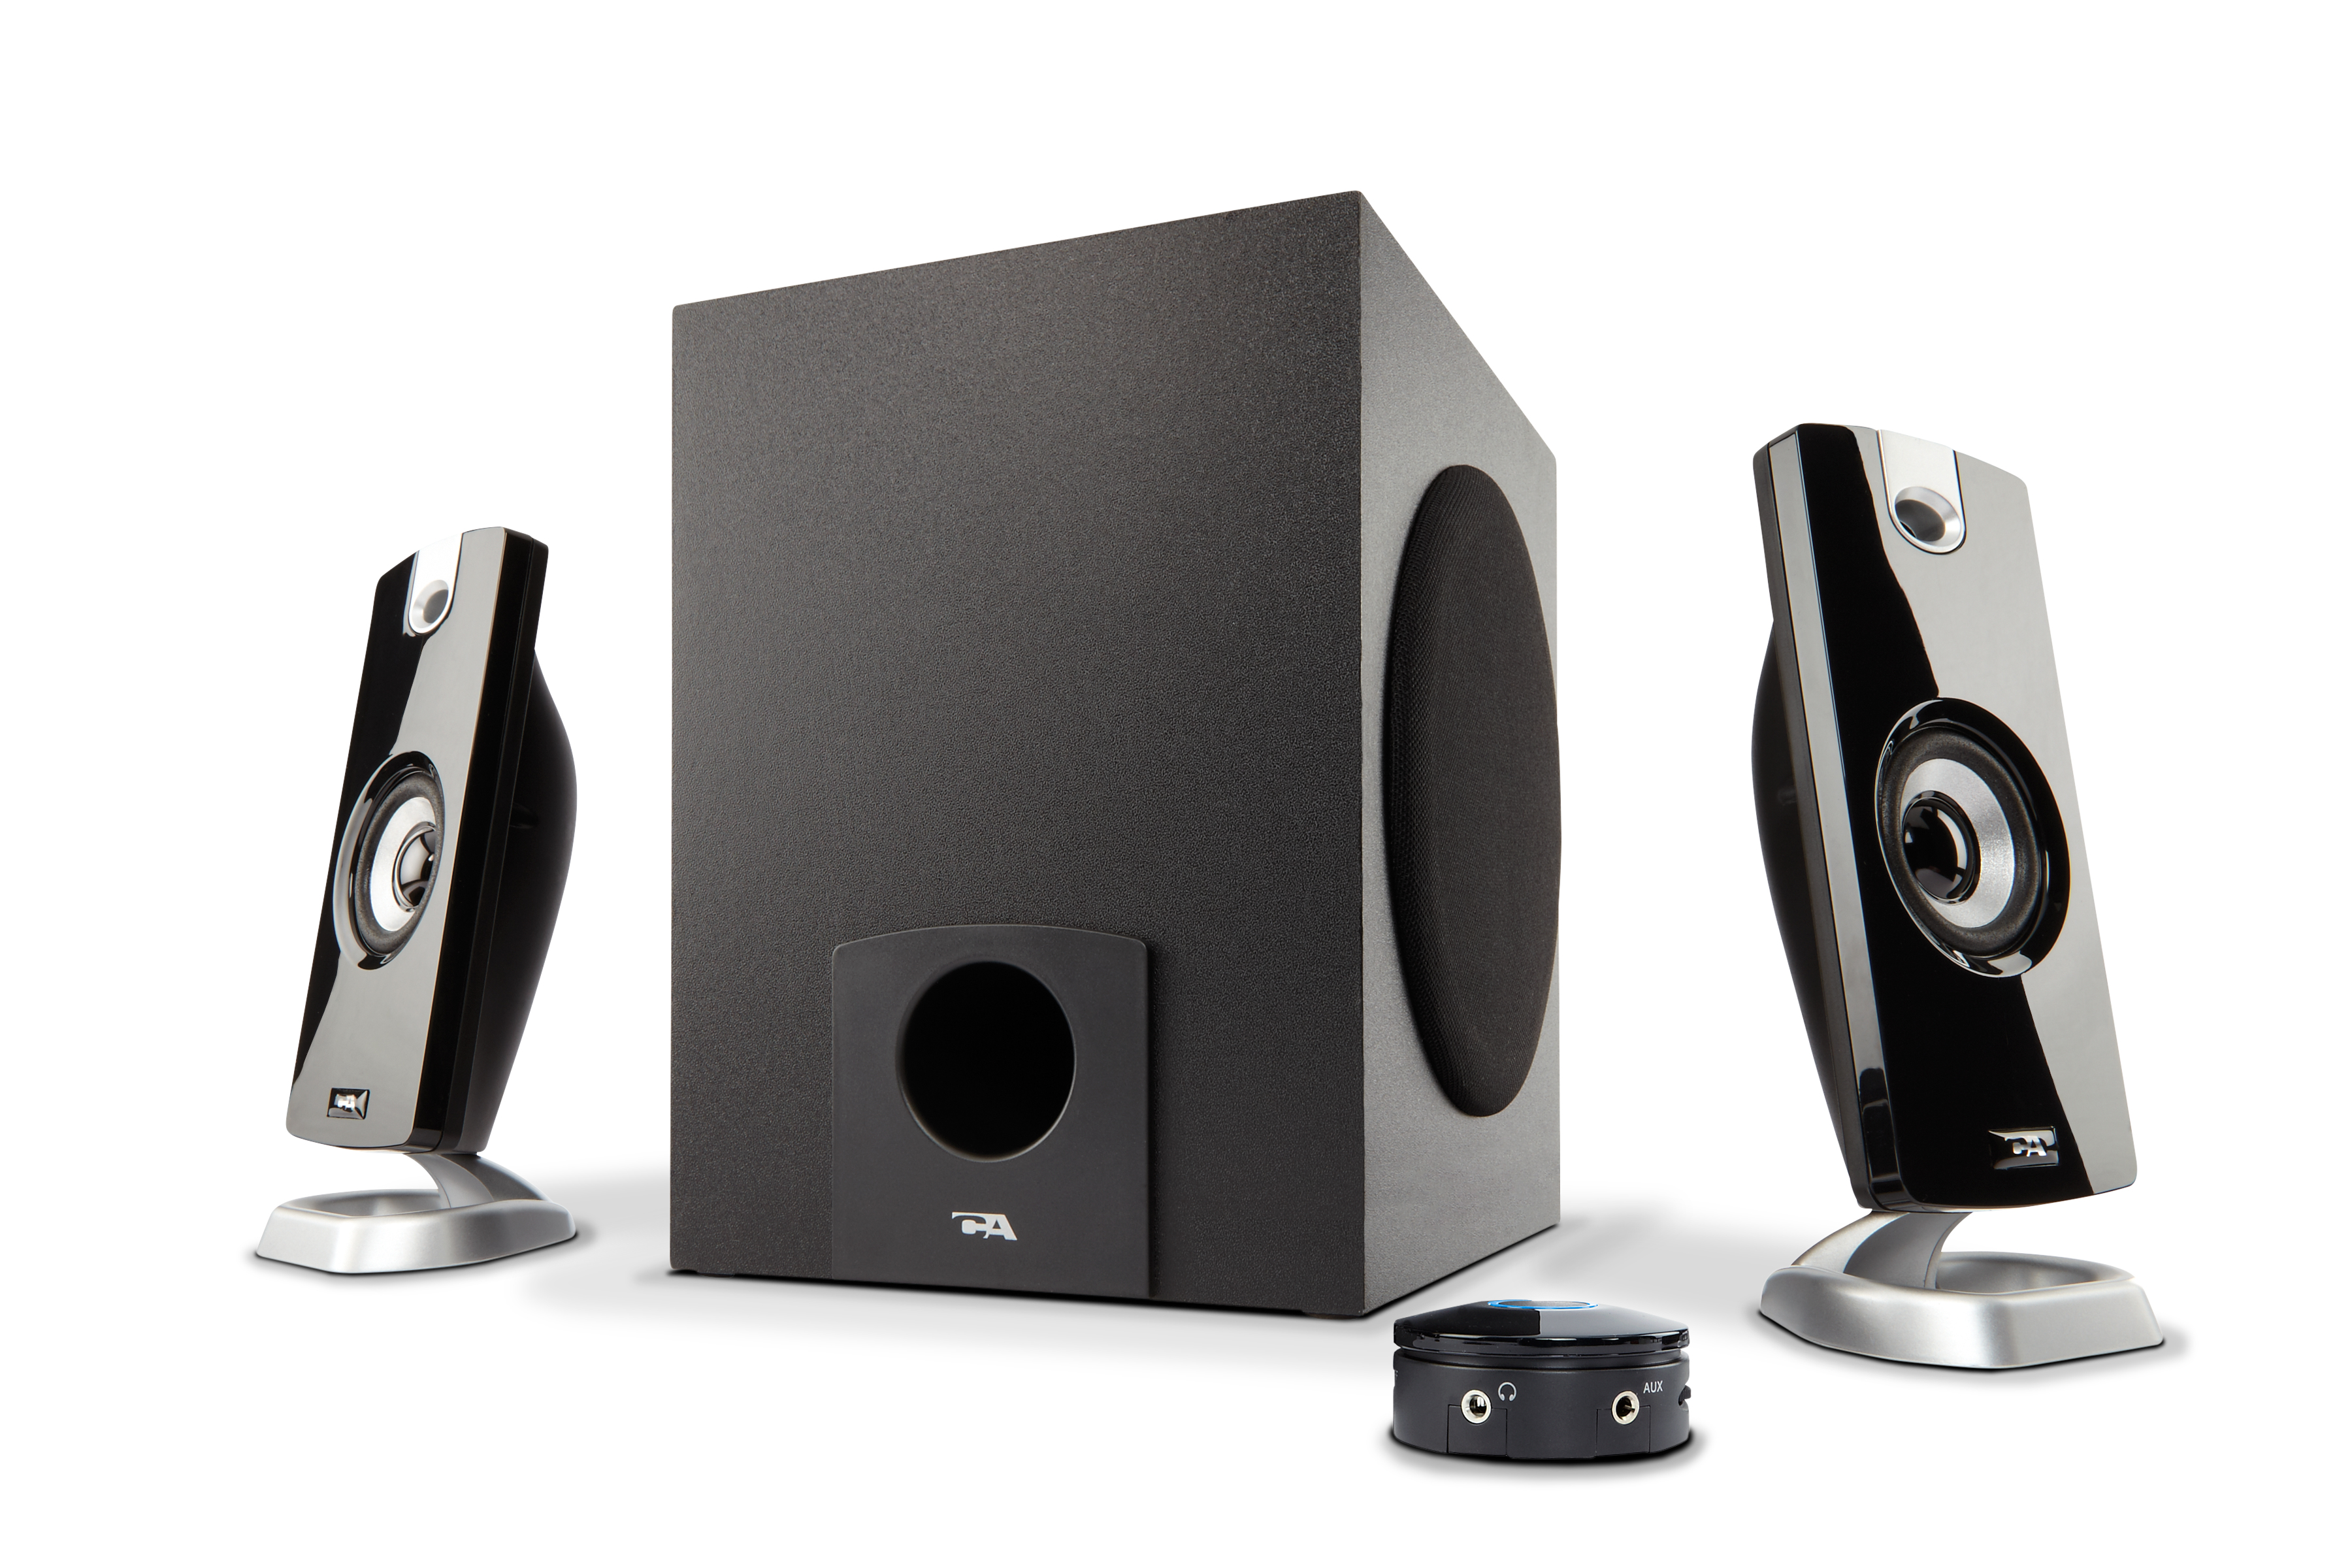 Cyber Acoustics CA-3090 9 Watts total RMS 2.1 3 Piece Flat Panel Design Subwoofer & Satellite Speaker System - image 1 of 4